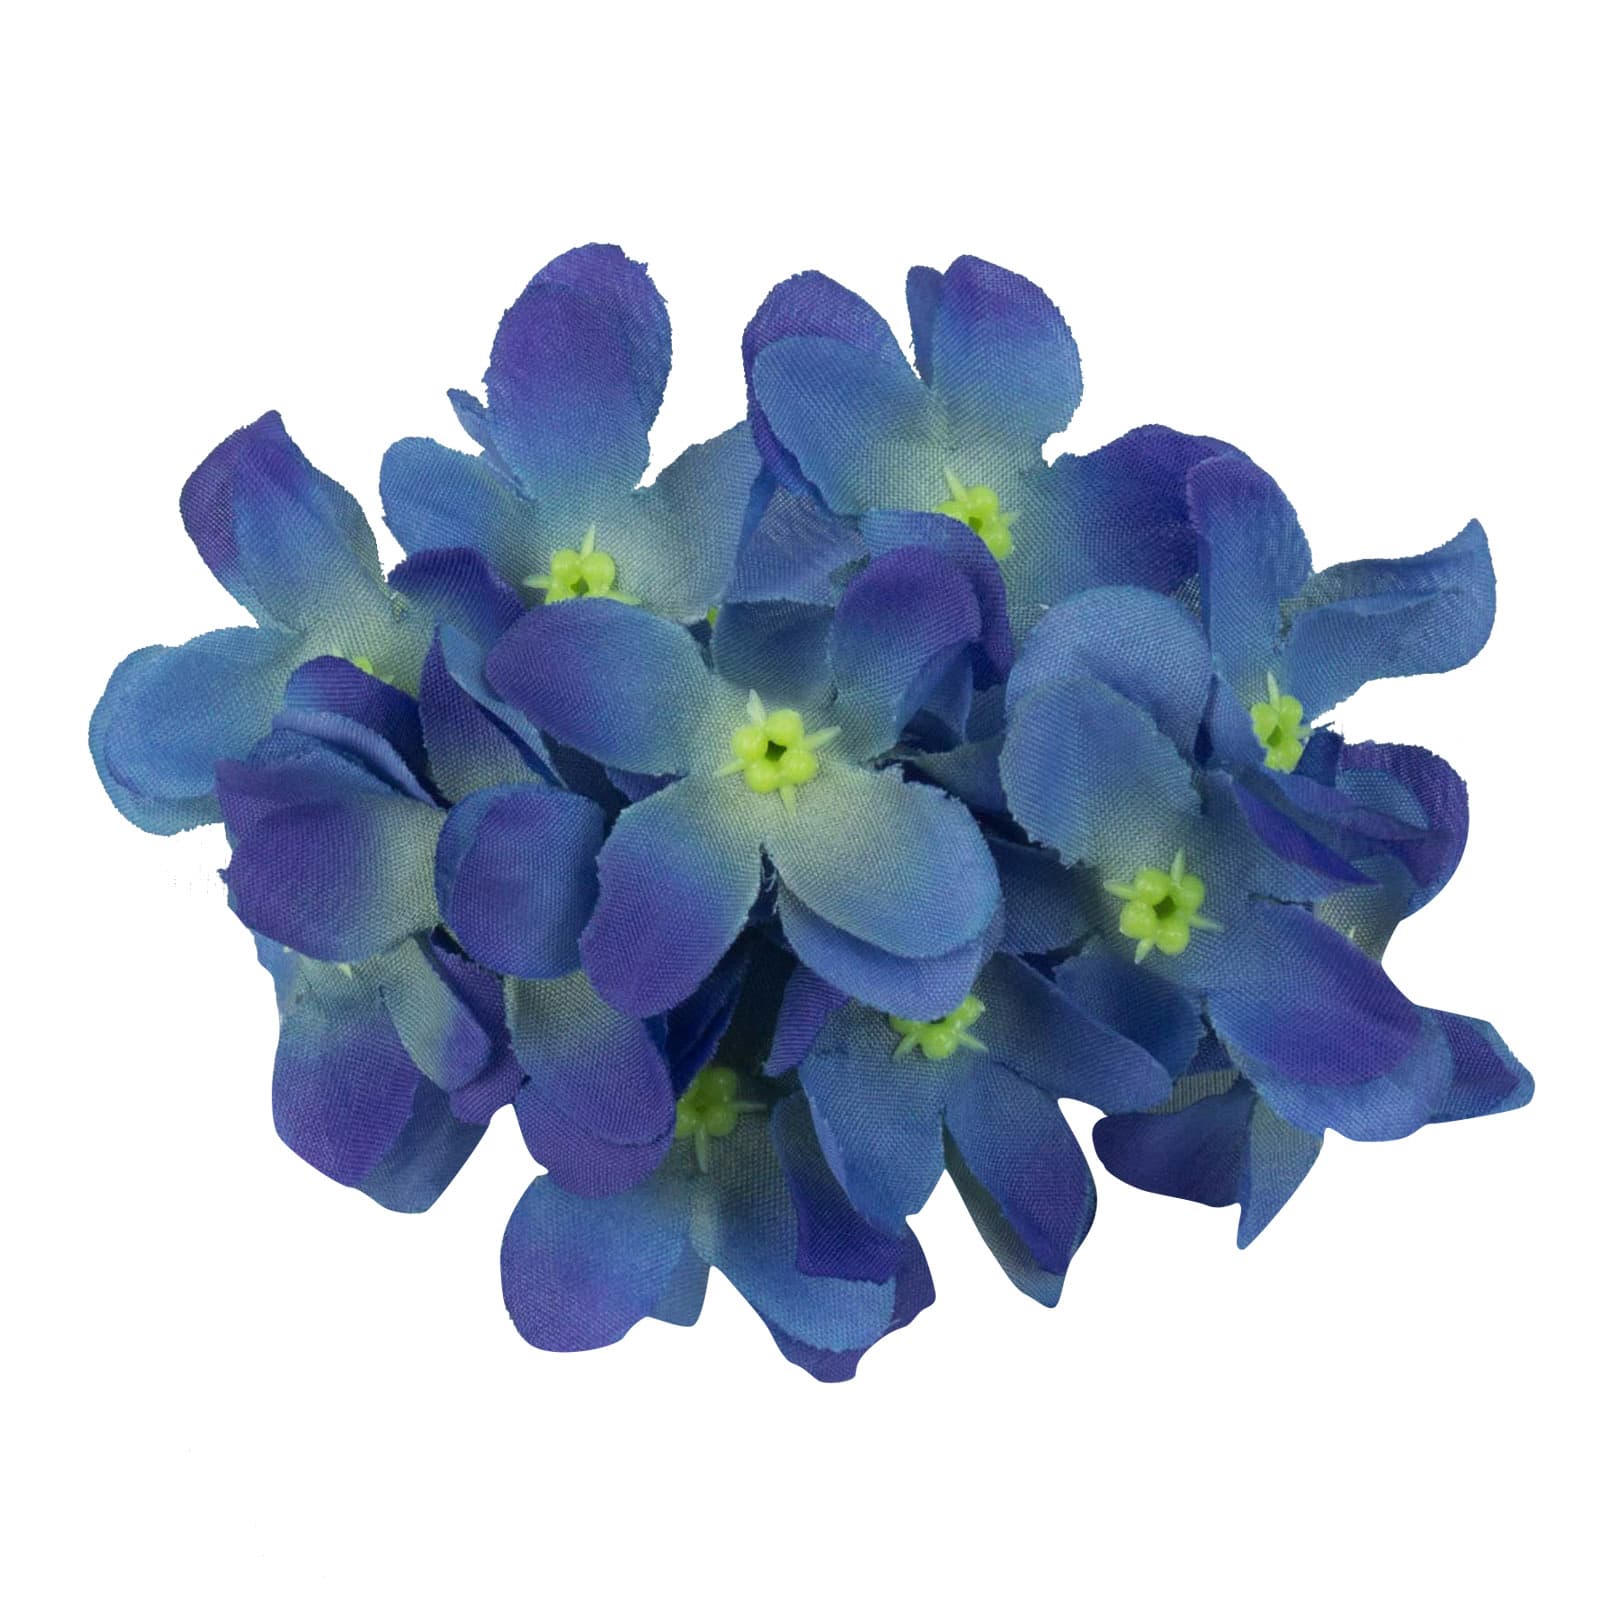 High Quality Artificial Hydrangea Flower Heads - Wholesale Flowers